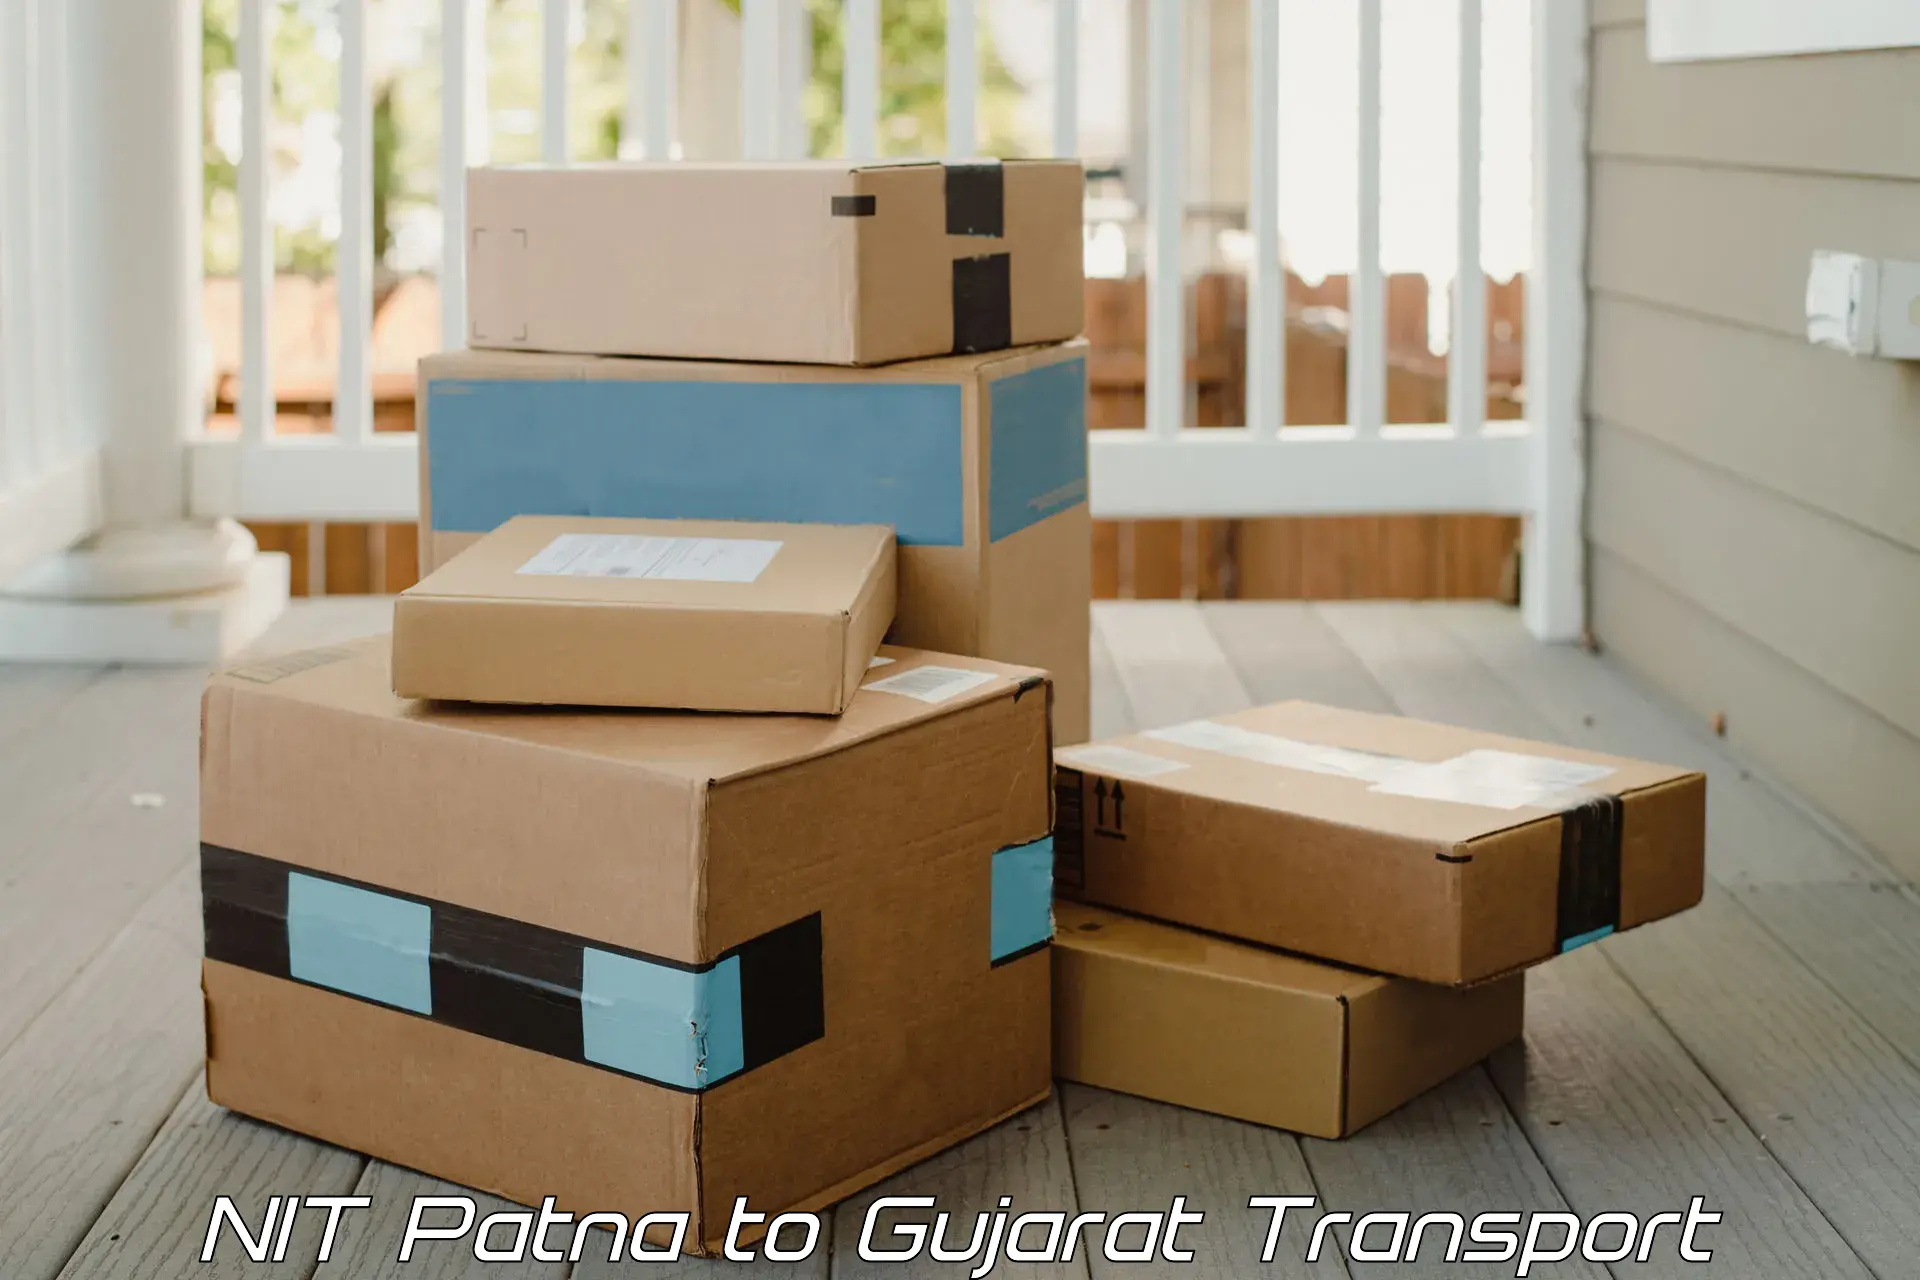 Express transport services in NIT Patna to Mundra